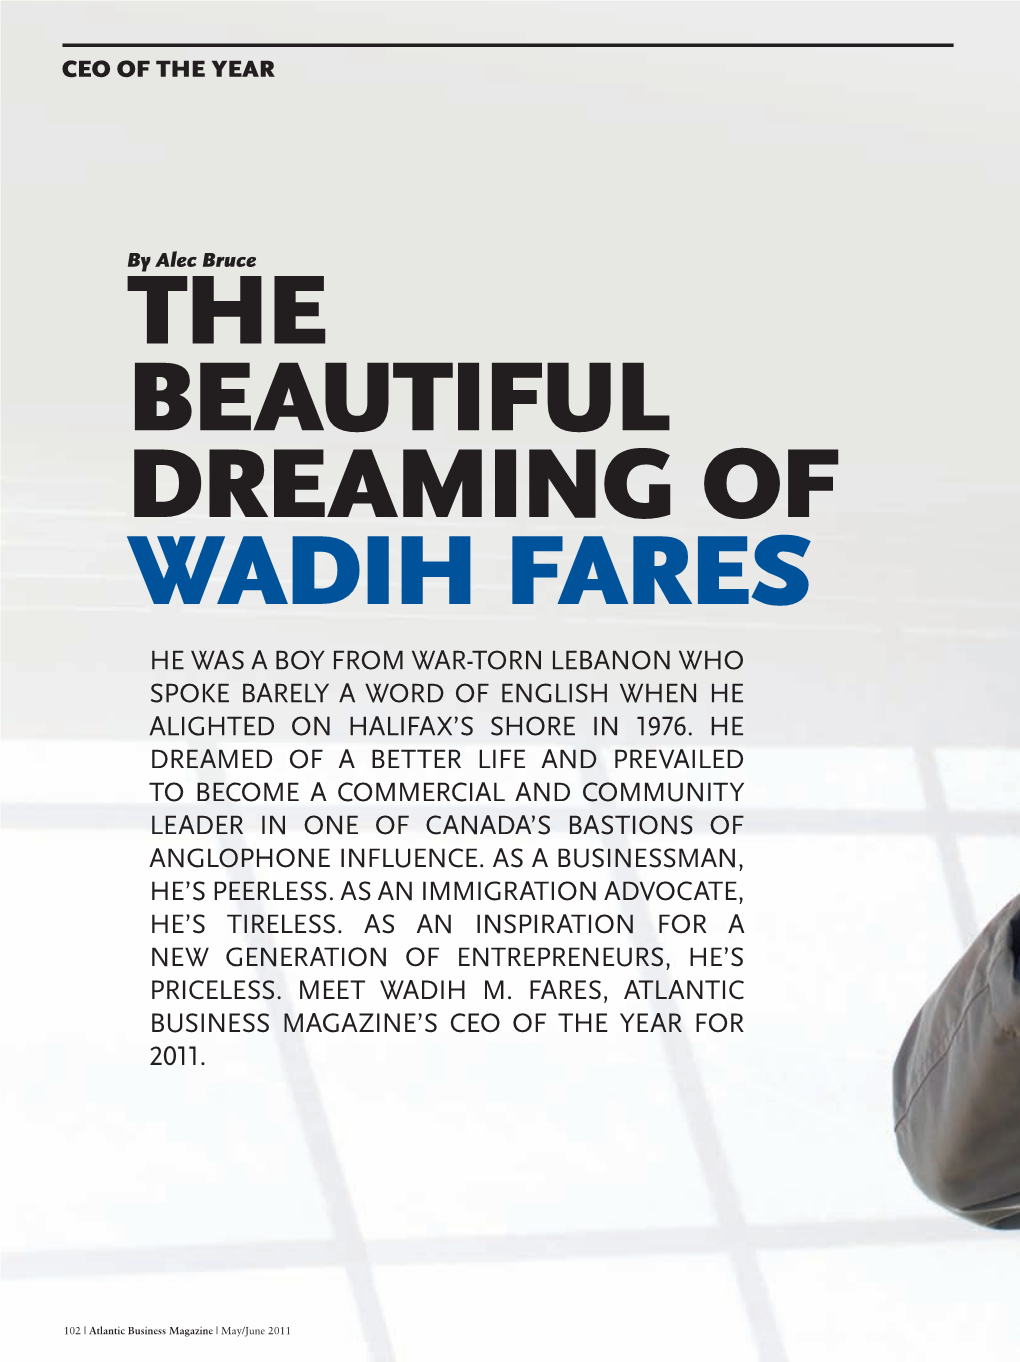 The Beautiful Dreaming of Wadih Fares He Was a Boy from War-Torn Lebanon Who Spoke Barely a Word of English When He Alighted on Halifax’S Shore in 1976